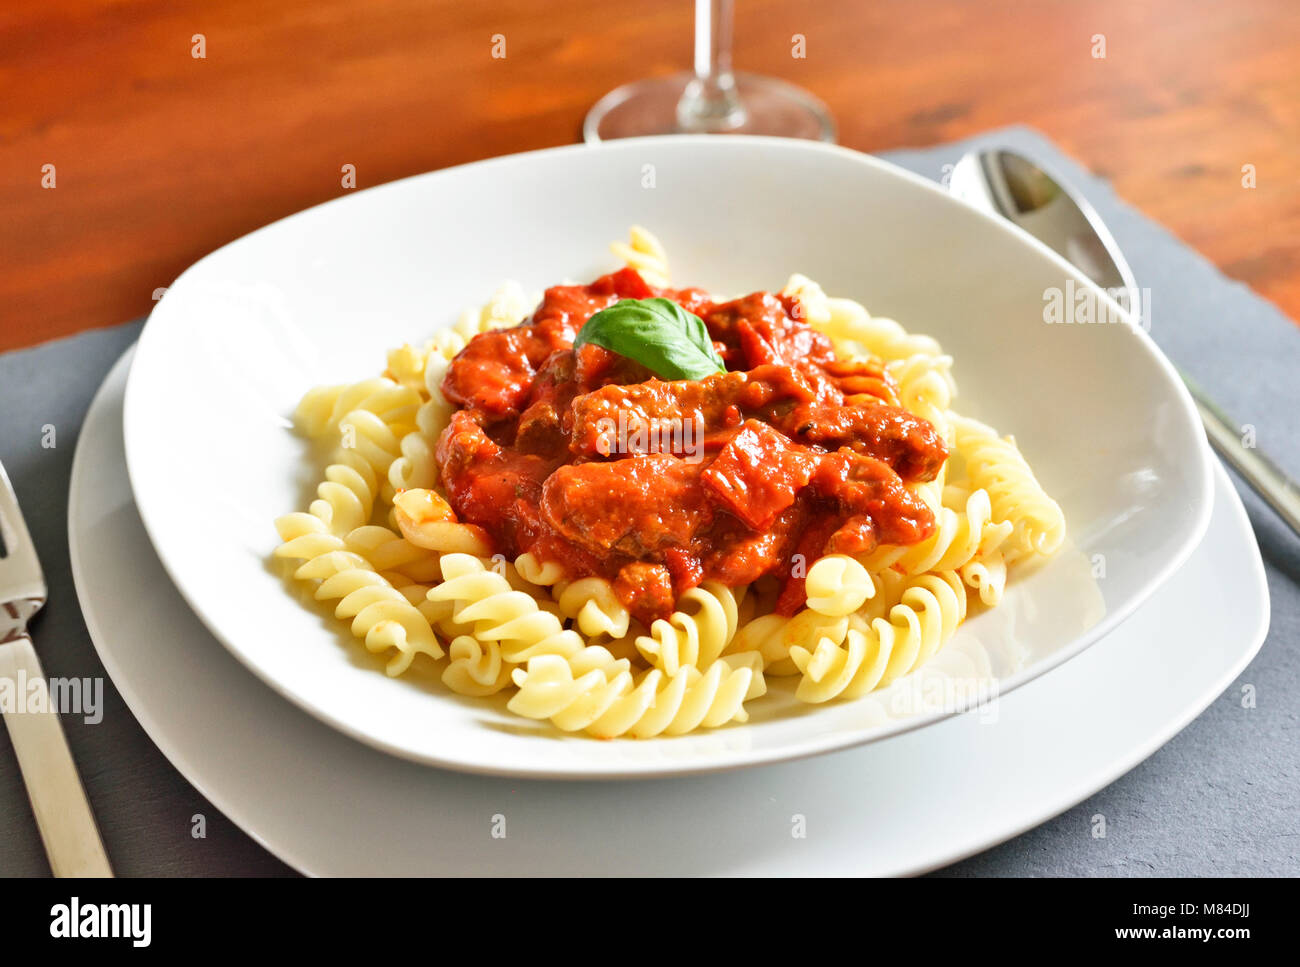 Delicious goulash dish on a white plate with basil leaf. Spiral pasta with tomato sauce. Stock Photo